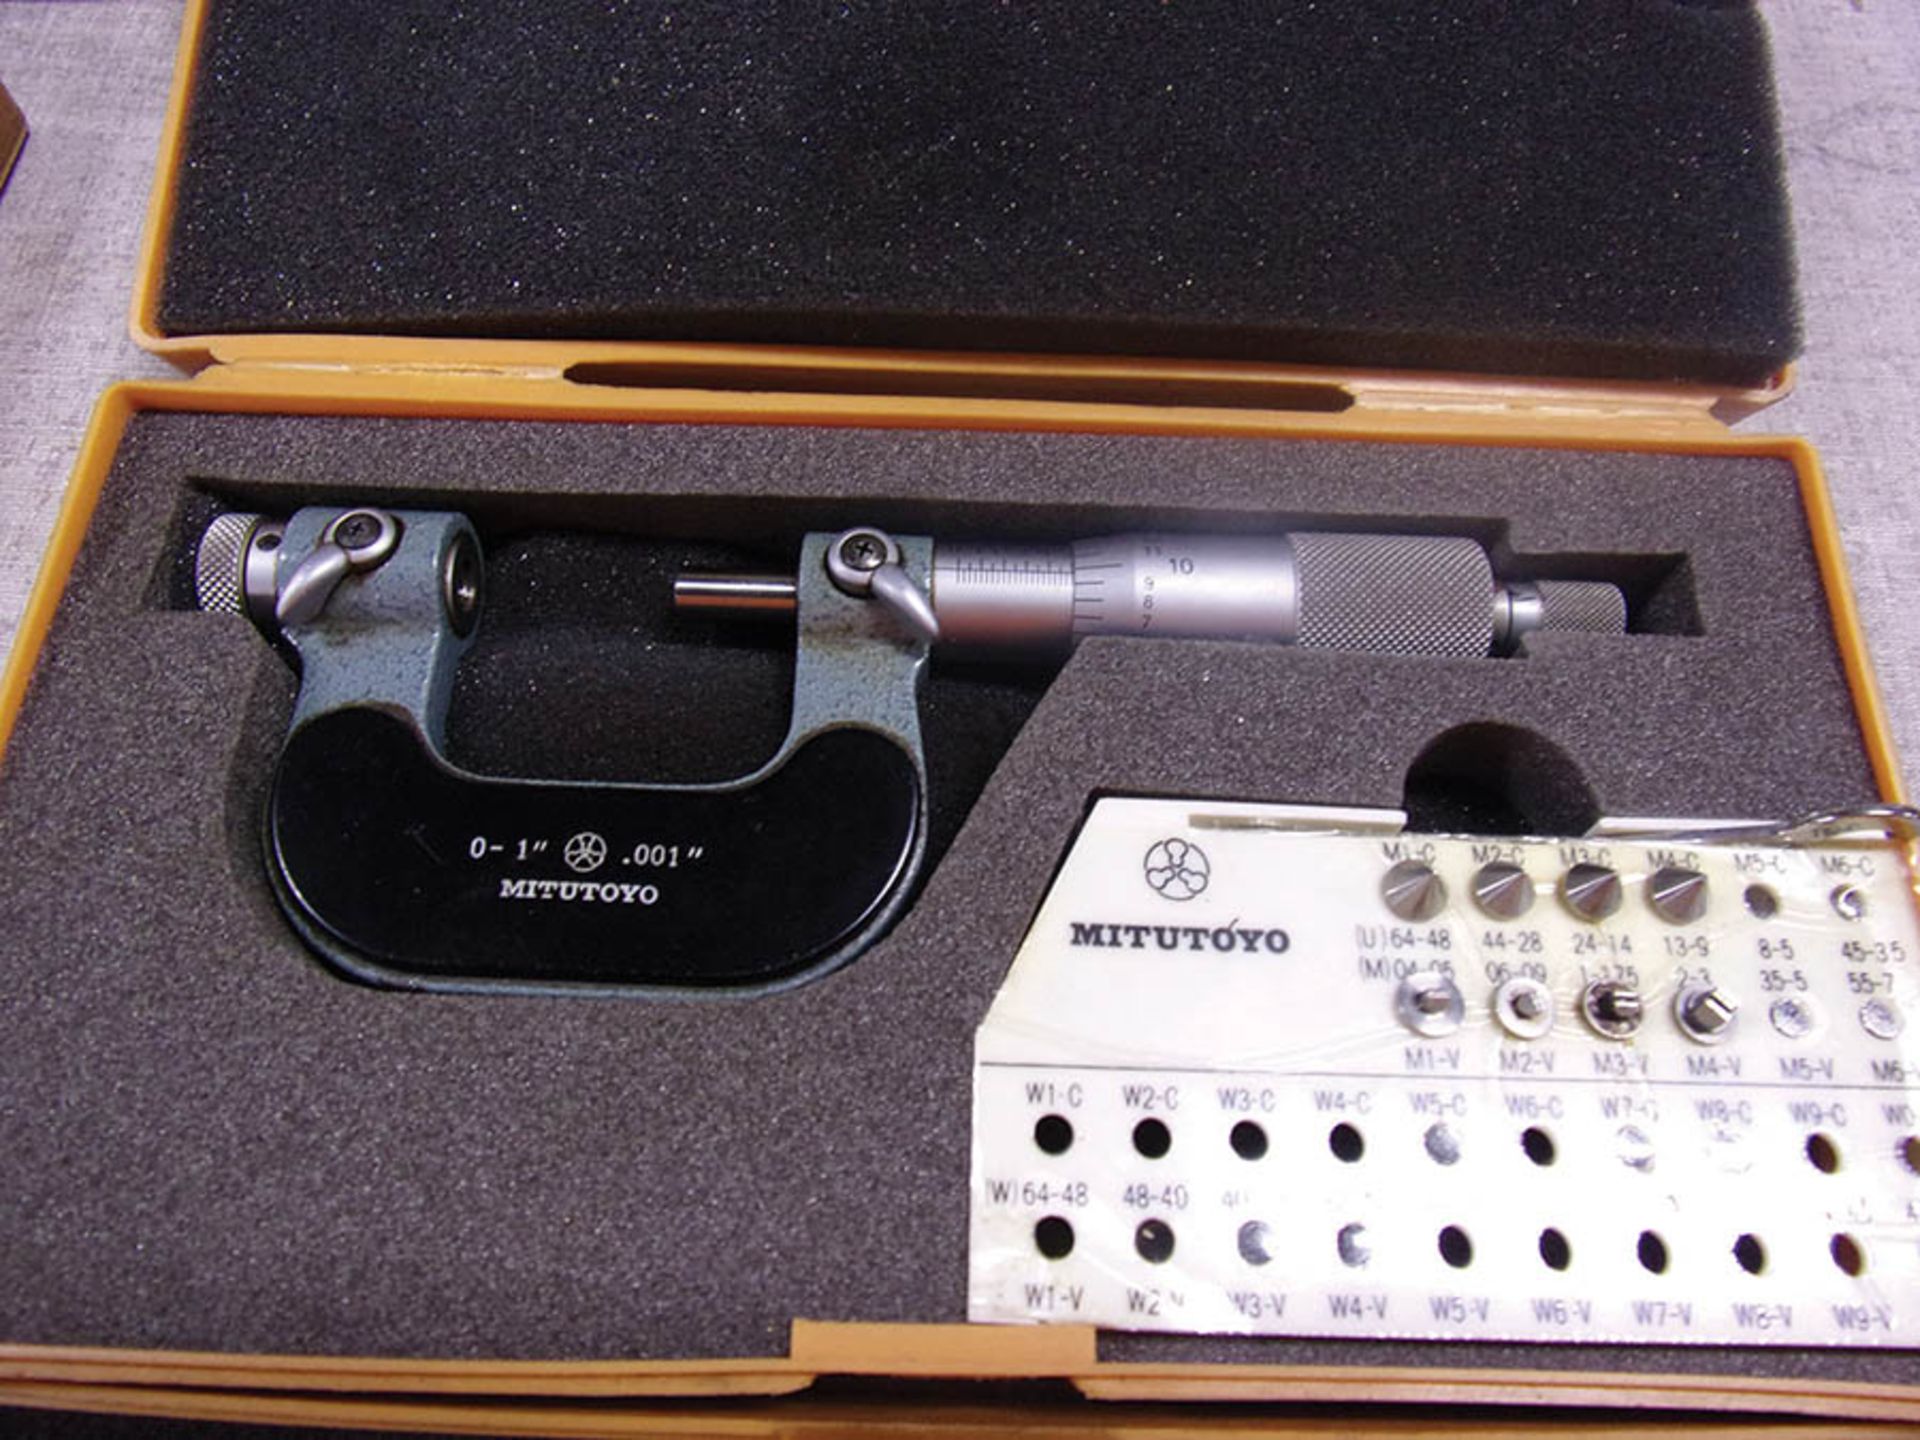 (3) MITUTOYO MICROMETERS 0-1'' AND 1-2'' - Image 2 of 3